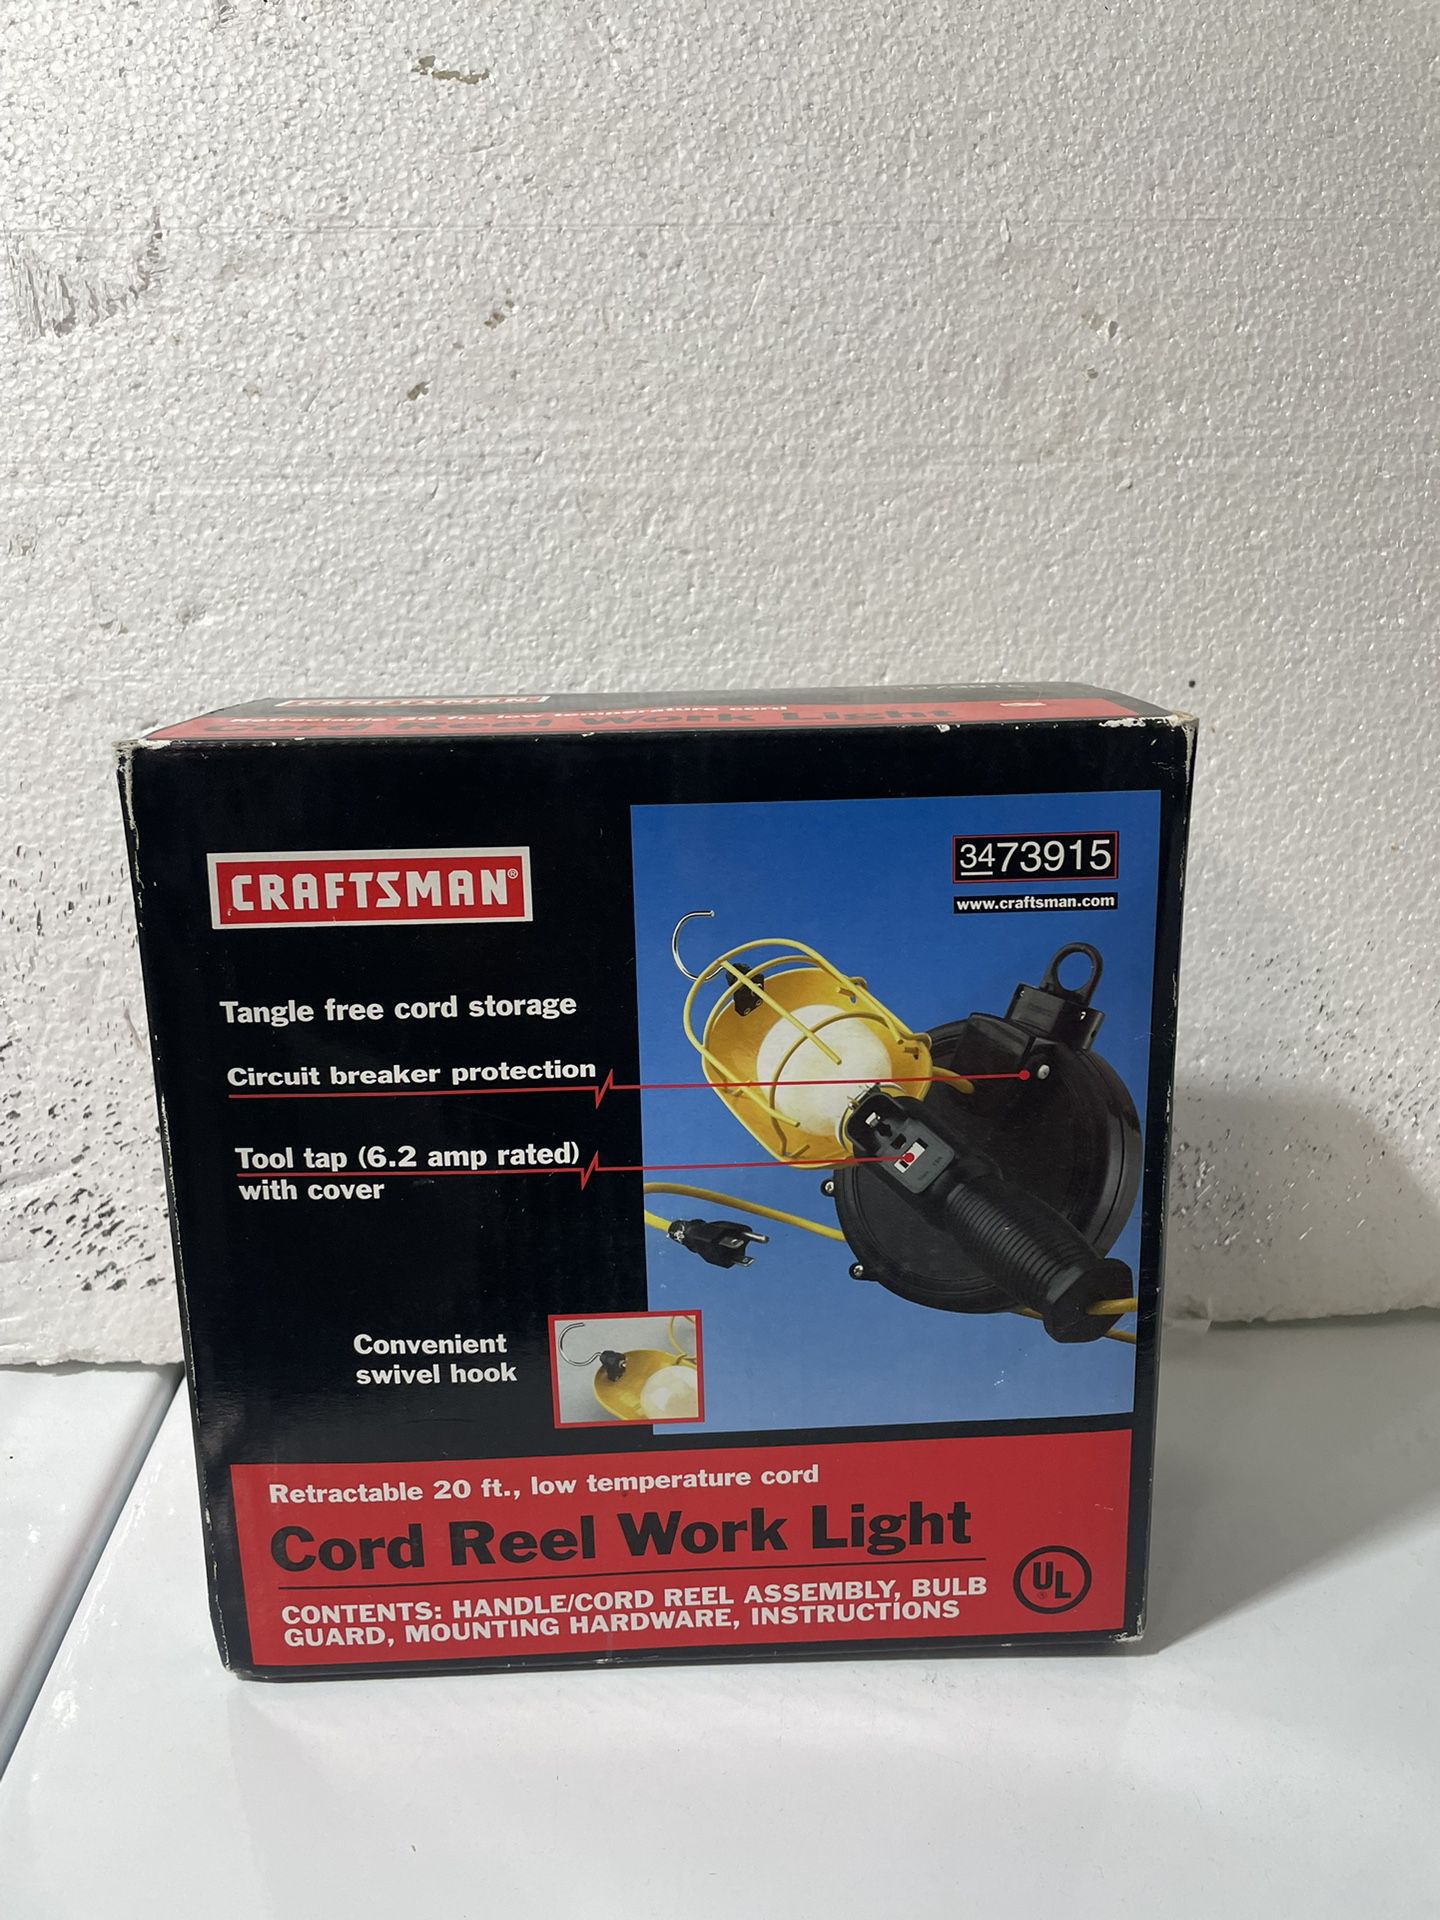 Craftsman 20 ft Cord Reel Work Light for Sale in Livermore, CA - OfferUp